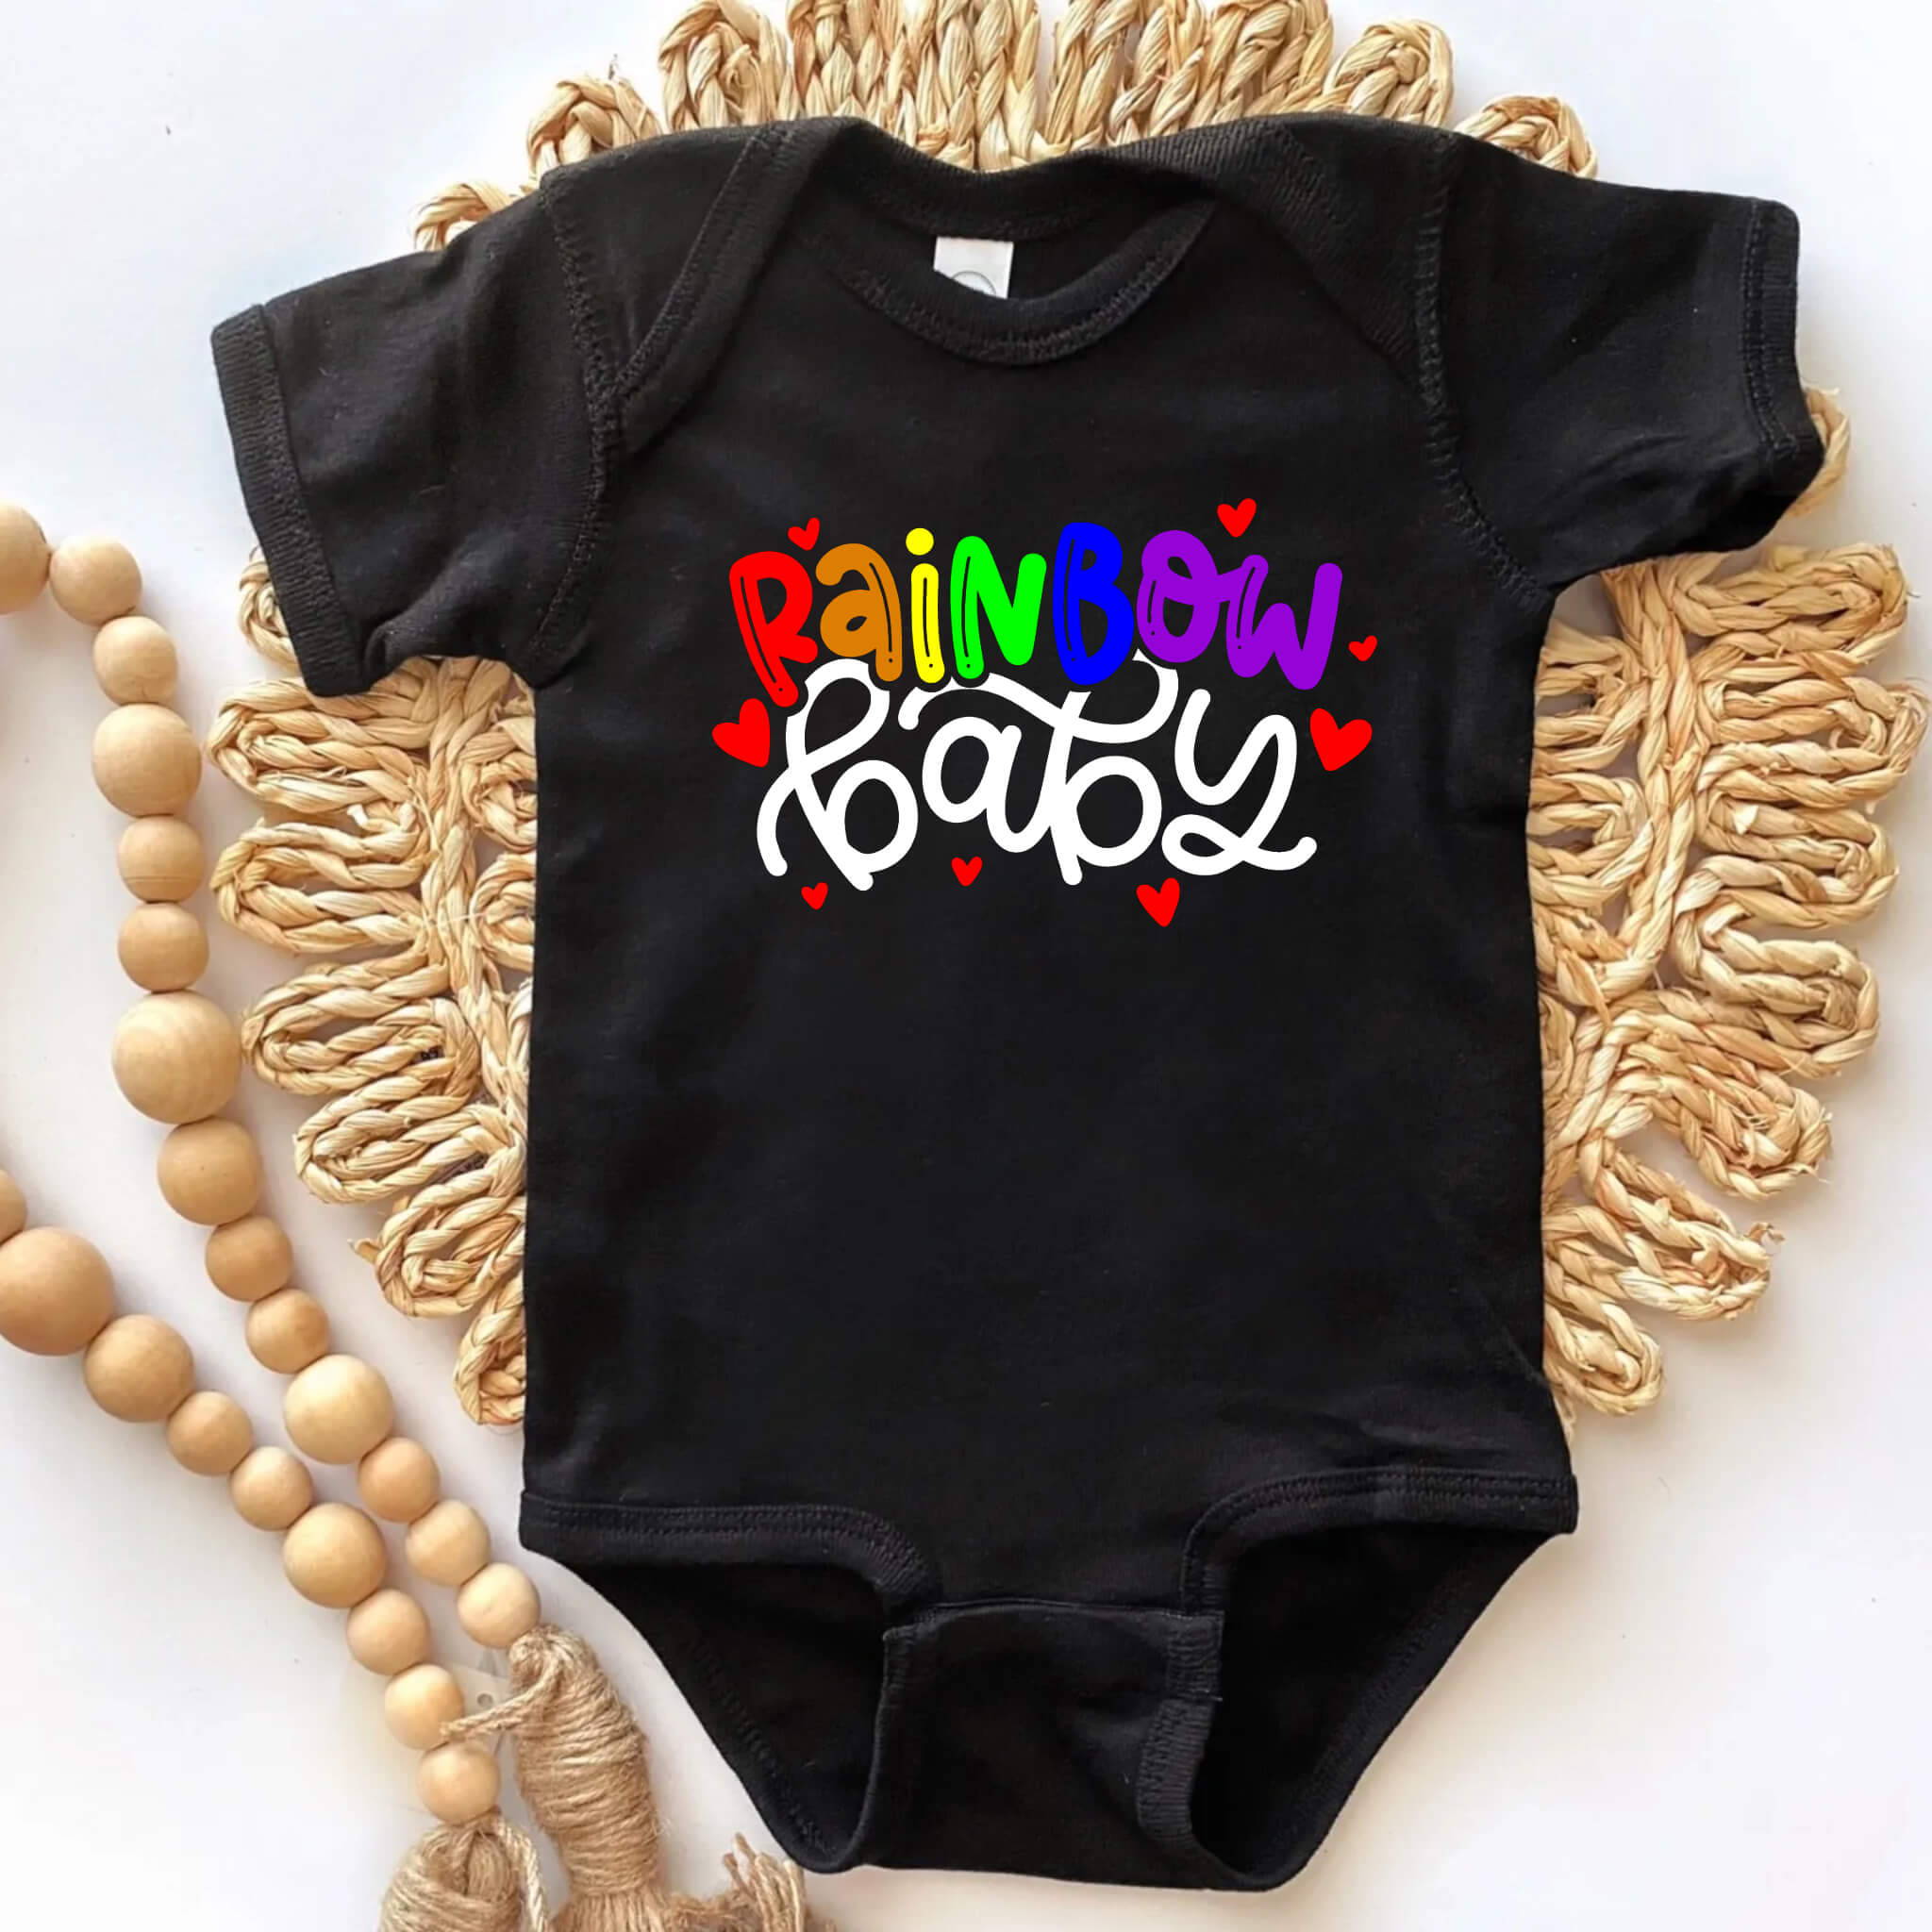 New Baby Onesie, Rainbow Baby Onesie Outfit, Baby Bodysuit, Boy’s, Girl’s Baby Shower Gift, New Baby Take Home Outfit, Maternity Photo Prop Onesie, Grateful Baby Onesie Outfit